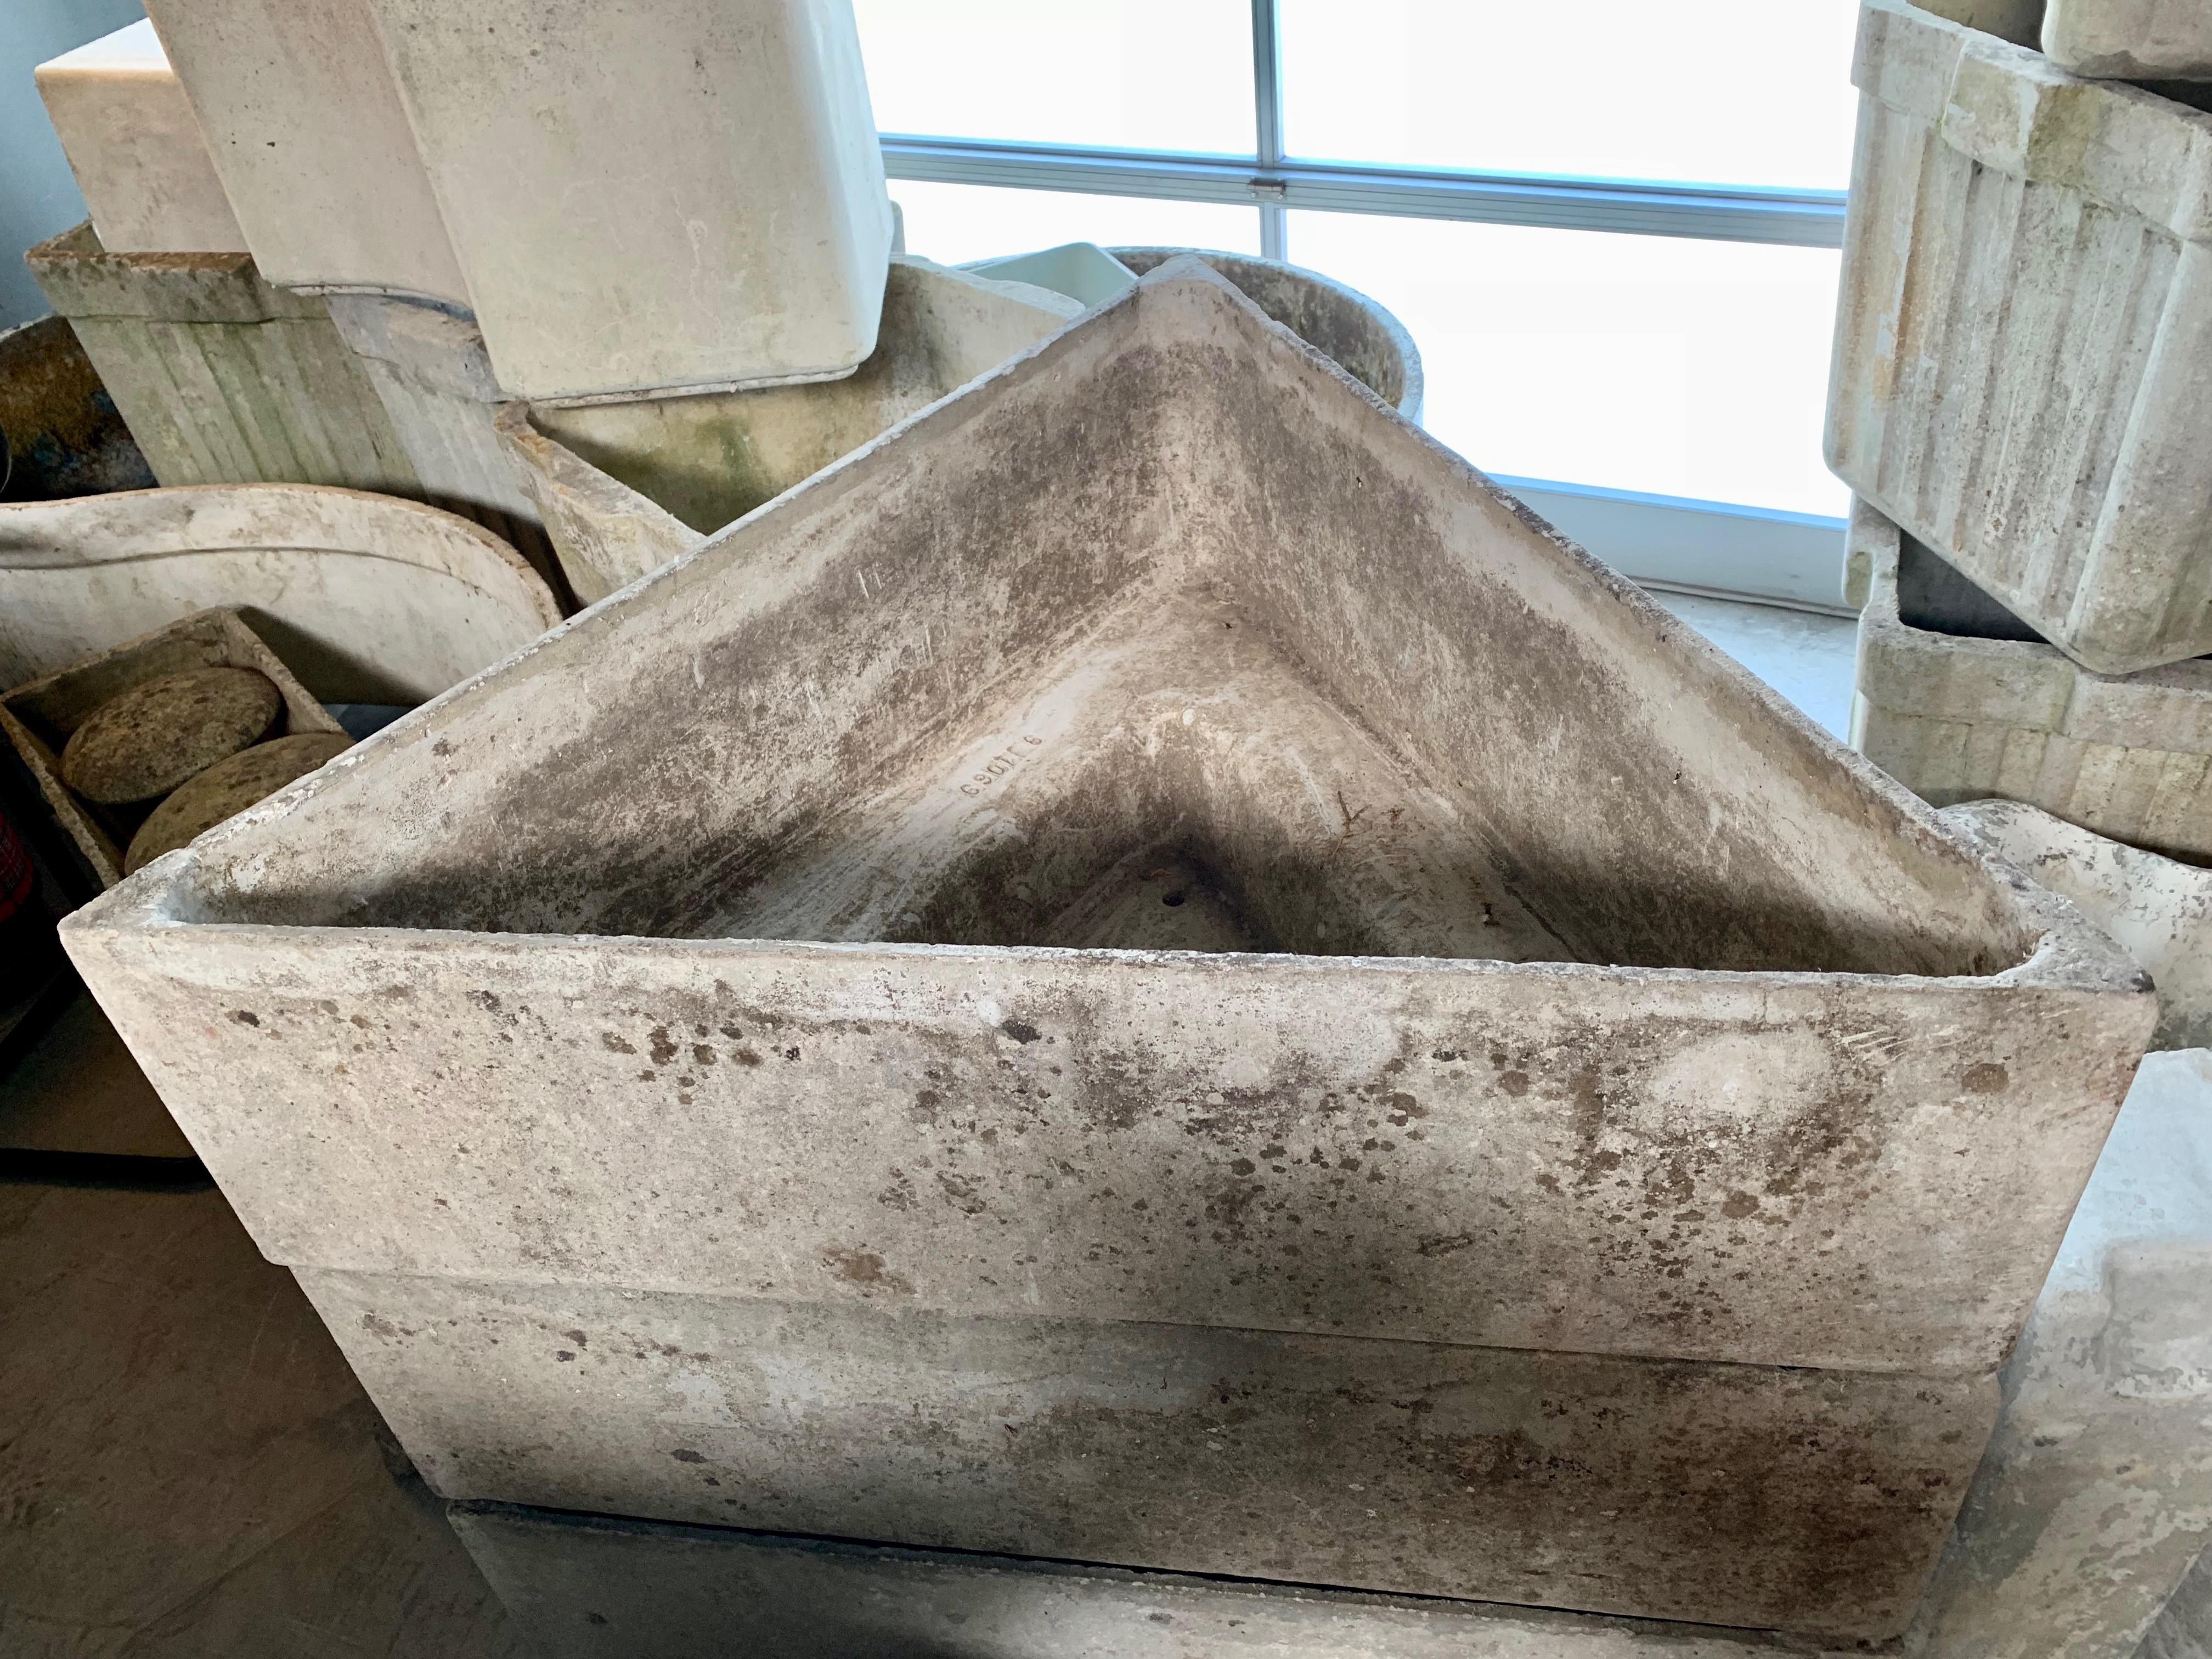 Fantastic concrete sculptural planters by Willy Guhl. 3 feet wide. Large triangular planters with faceted edges and triangular pedestal base. Large scale and presence. Cool piece of usable sculpture for your home or garden. Excellent patina. 

Only